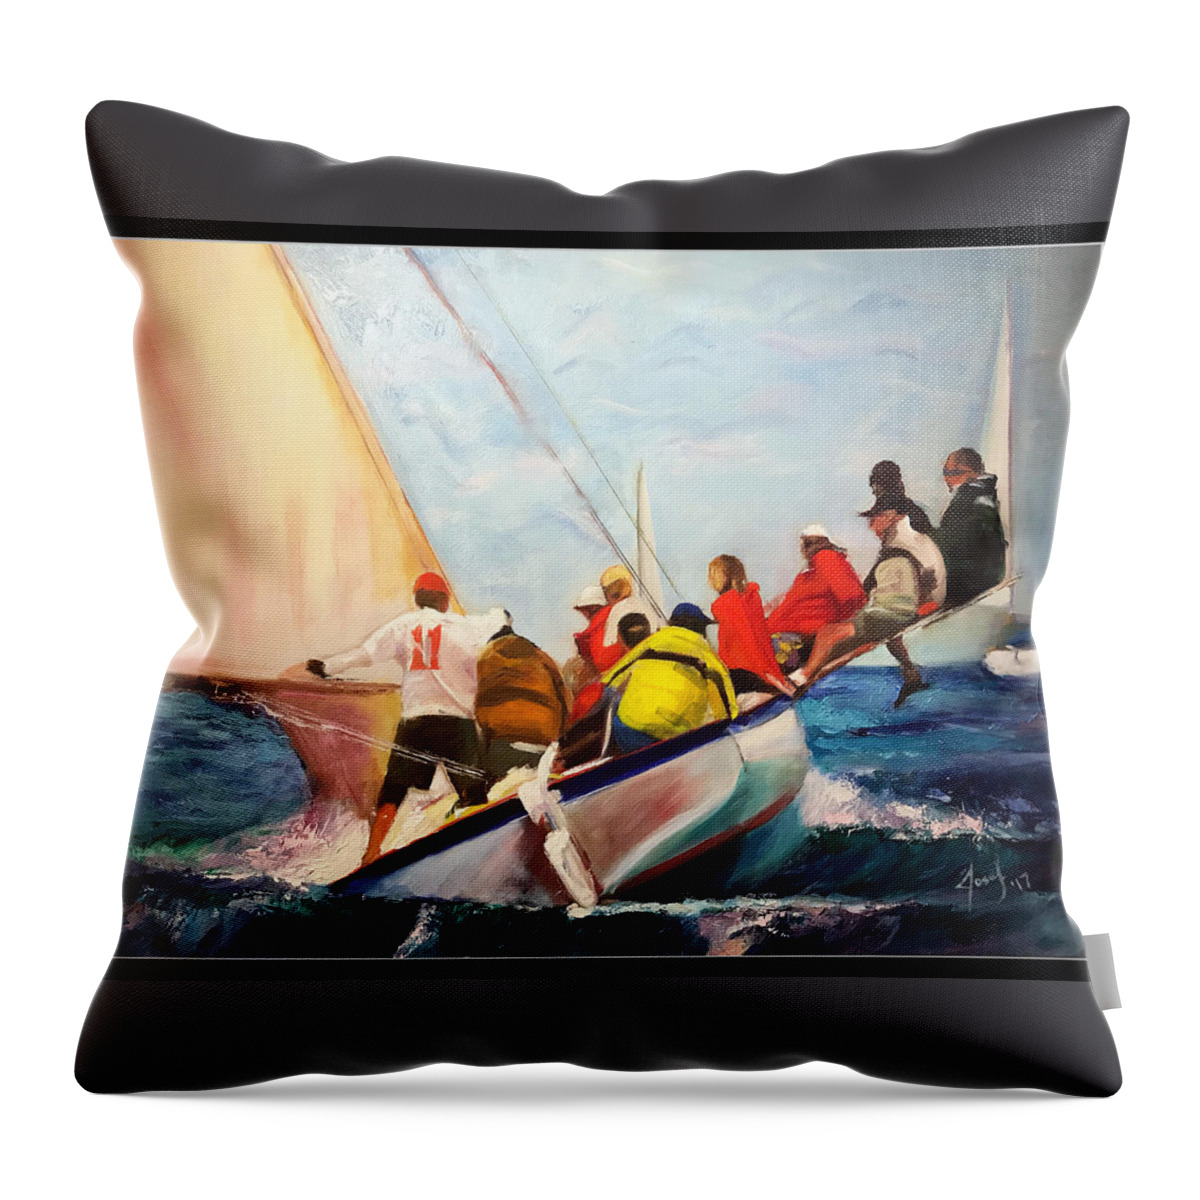 Theartistjosef Throw Pillow featuring the painting Racing Abaco Rage by Josef Kelly